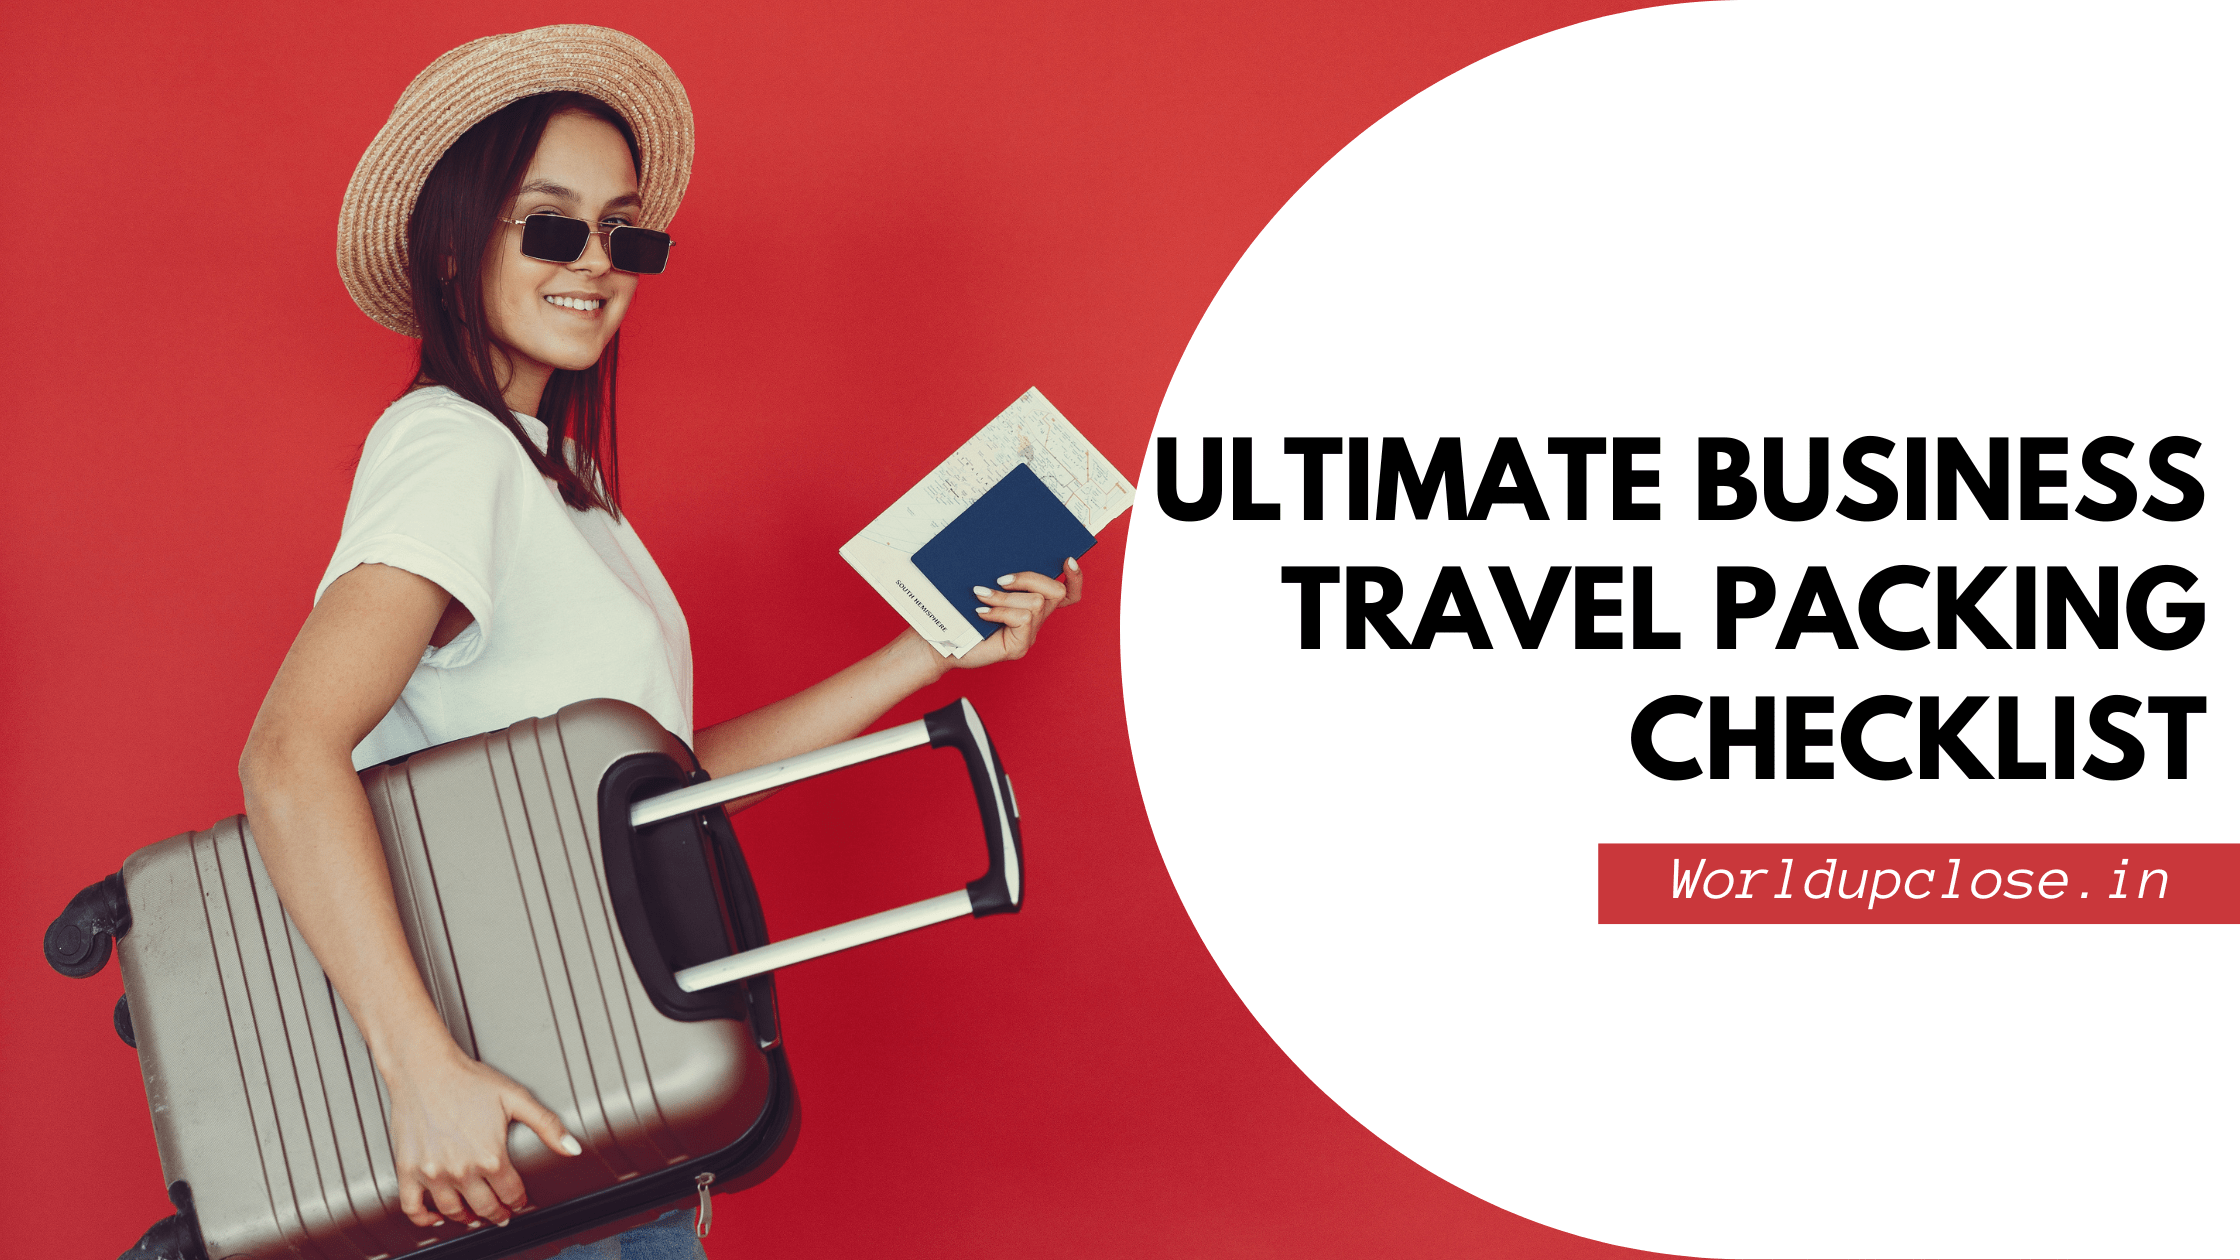 Ultimate Business Travel Packing Checklist 53